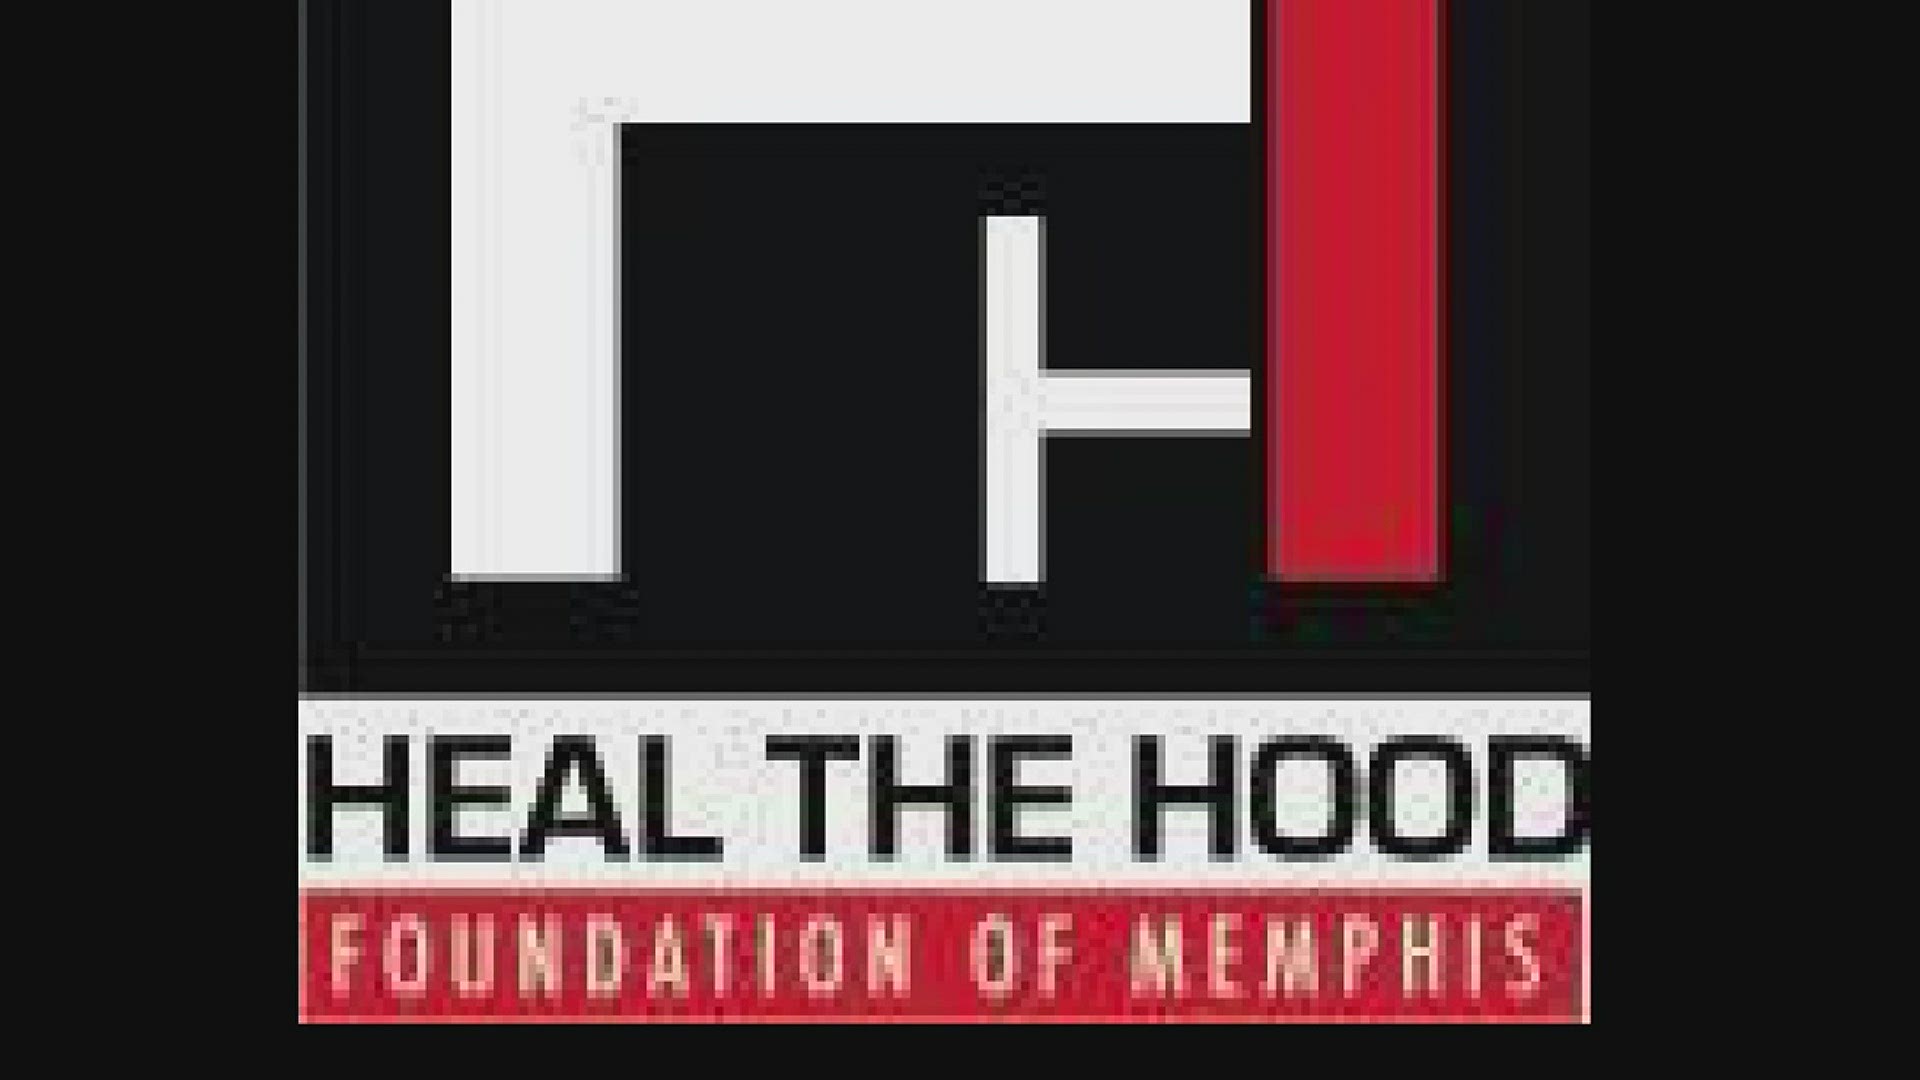 "Why not Memphis? Why not be able to create a hero for Memphis?" said CEO LaDell Beamon.